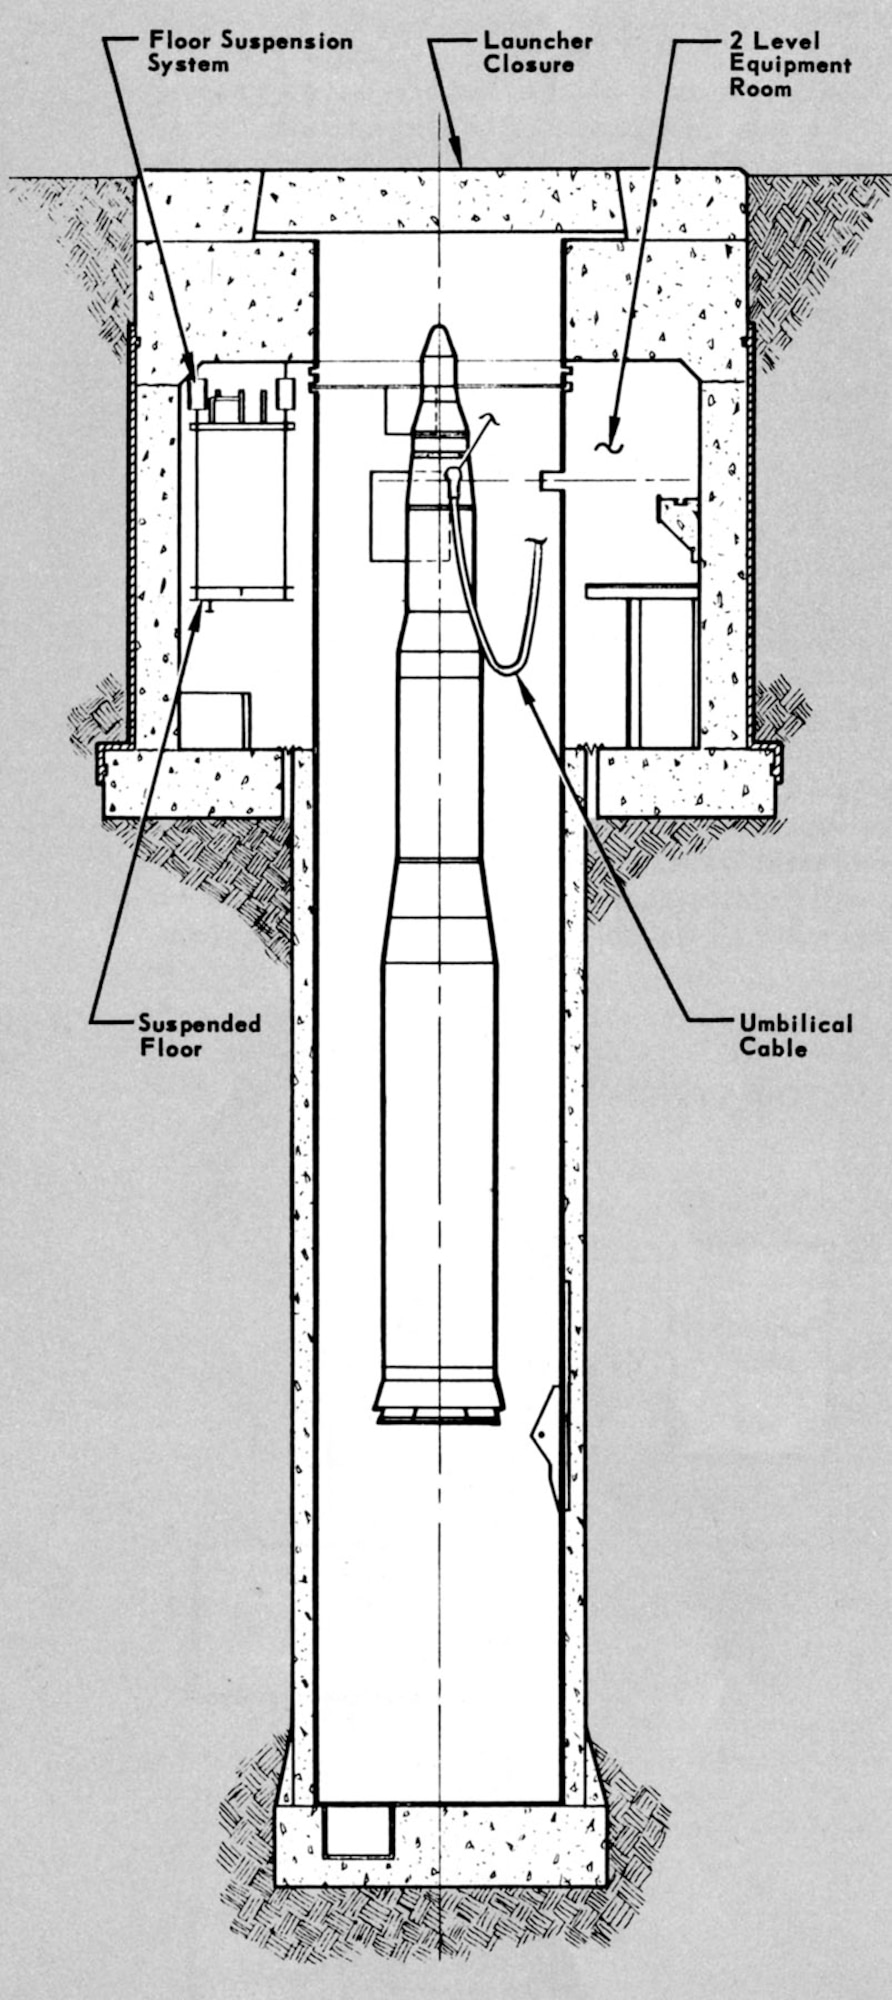 Thick concrete and steel protected Minuteman from nuclear attack, and the missile could be stored unattended and with minimum maintenance for long periods.